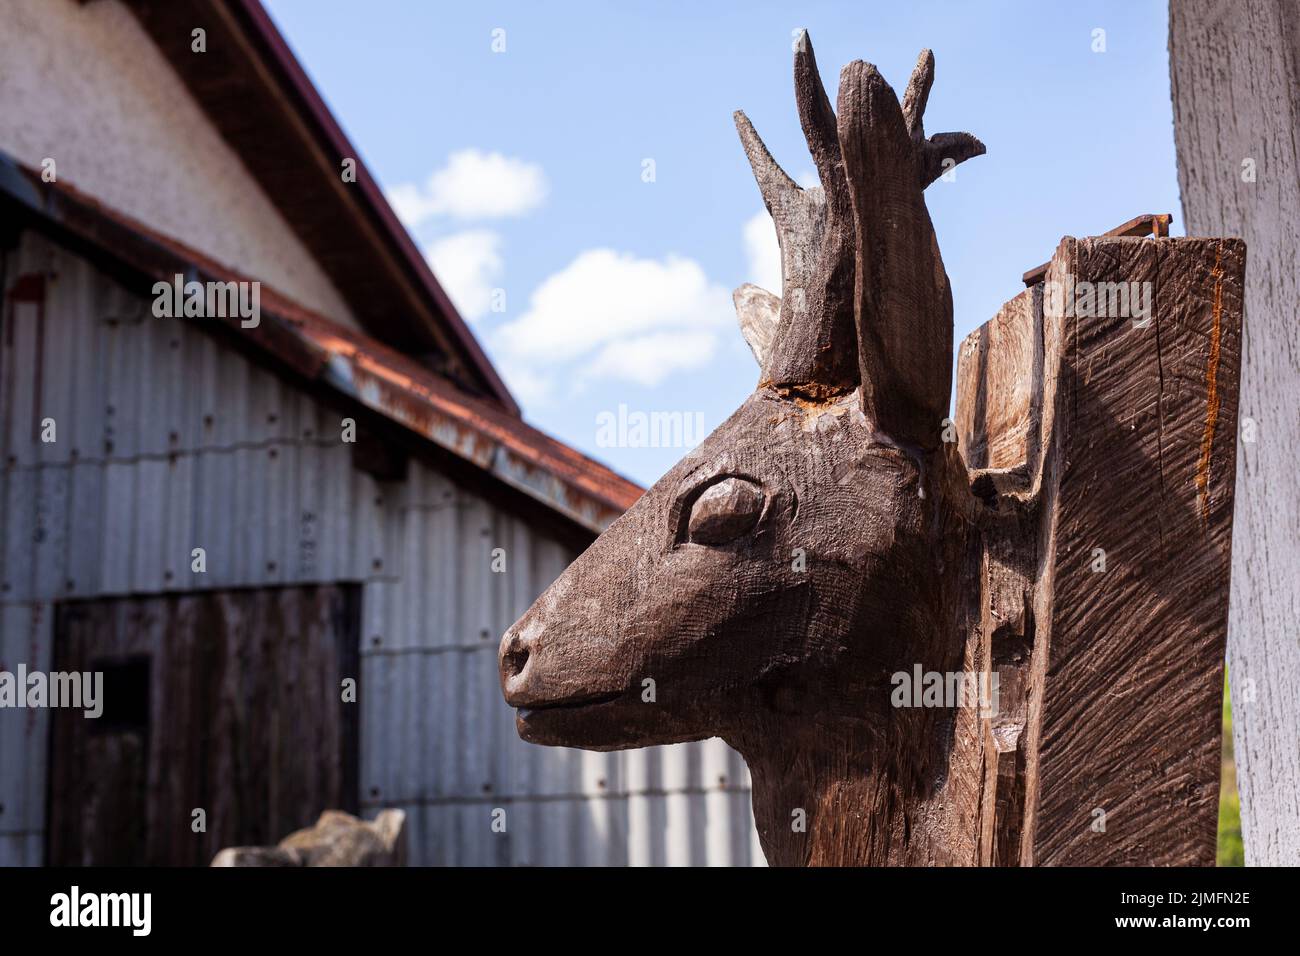 Head of a deer made from wood, Lokve. Slovenia Stock Photo